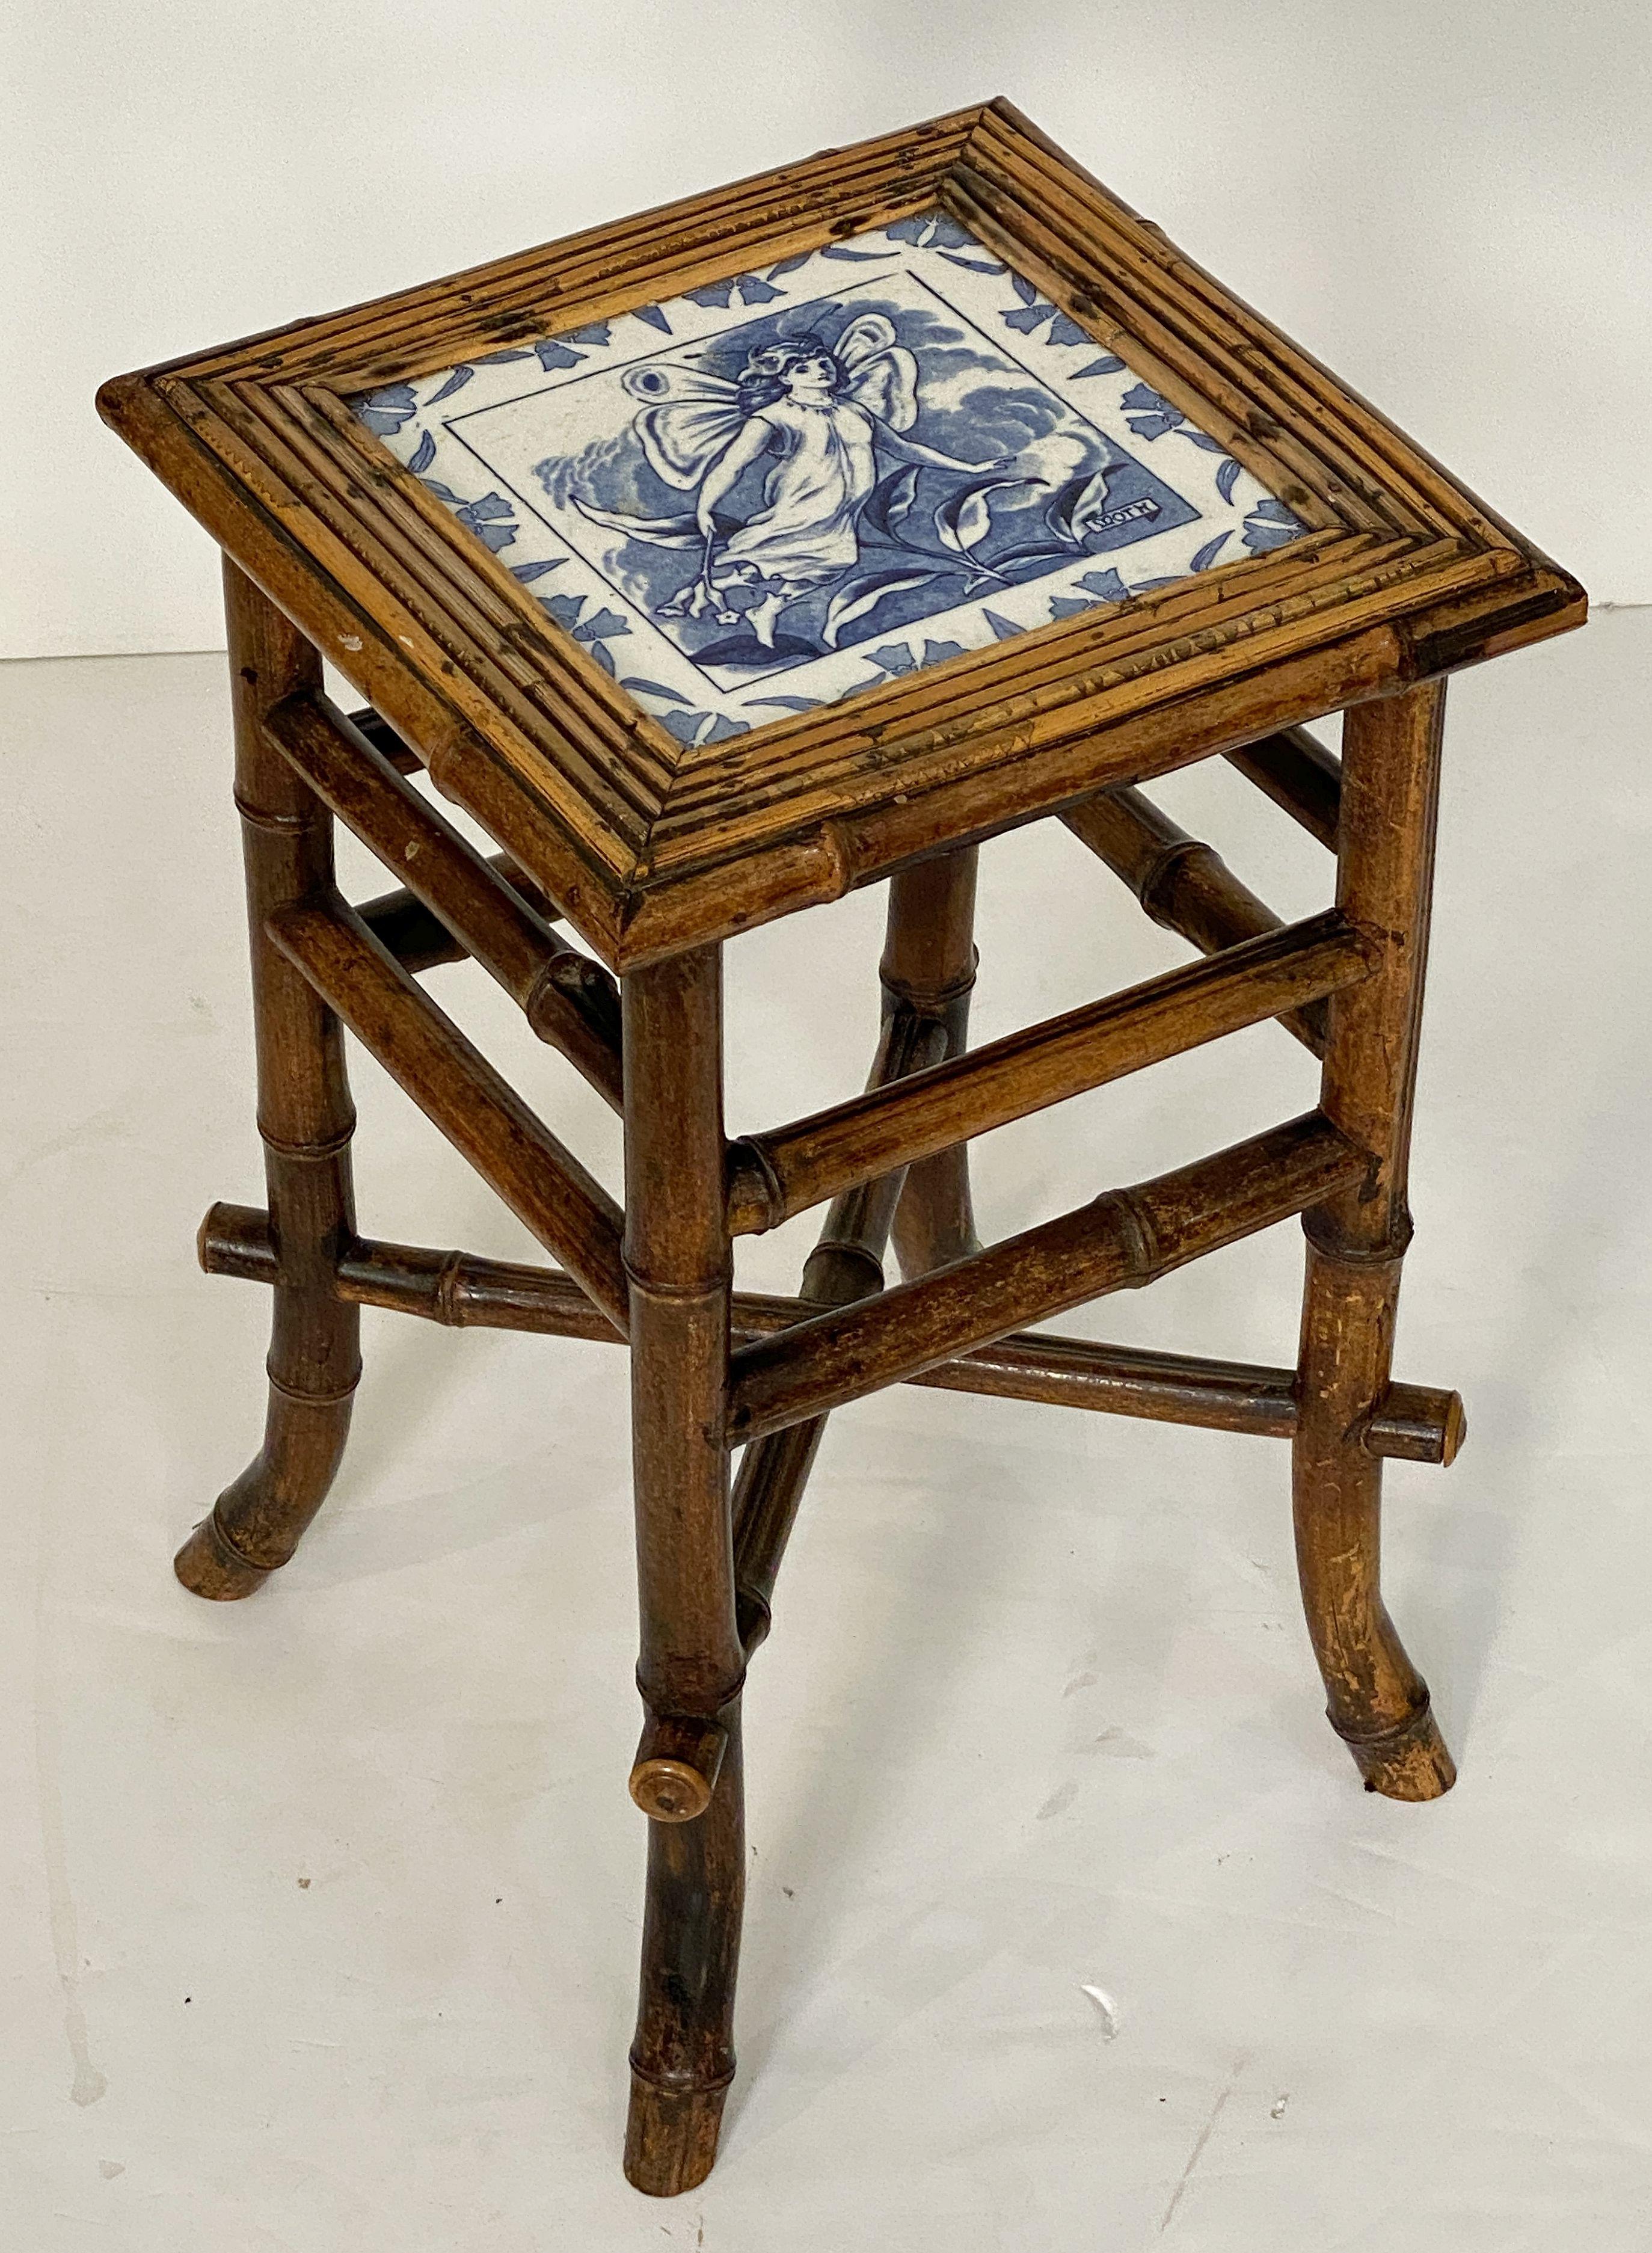 A fine English bamboo table or stool from the Aesthetic Movement period of the late 19th century, featuring a handsome patinated finish and square seat of bamboo with inset blue and white ceramic tile by Wedgwood of the faerie (or fairy), Moth, from